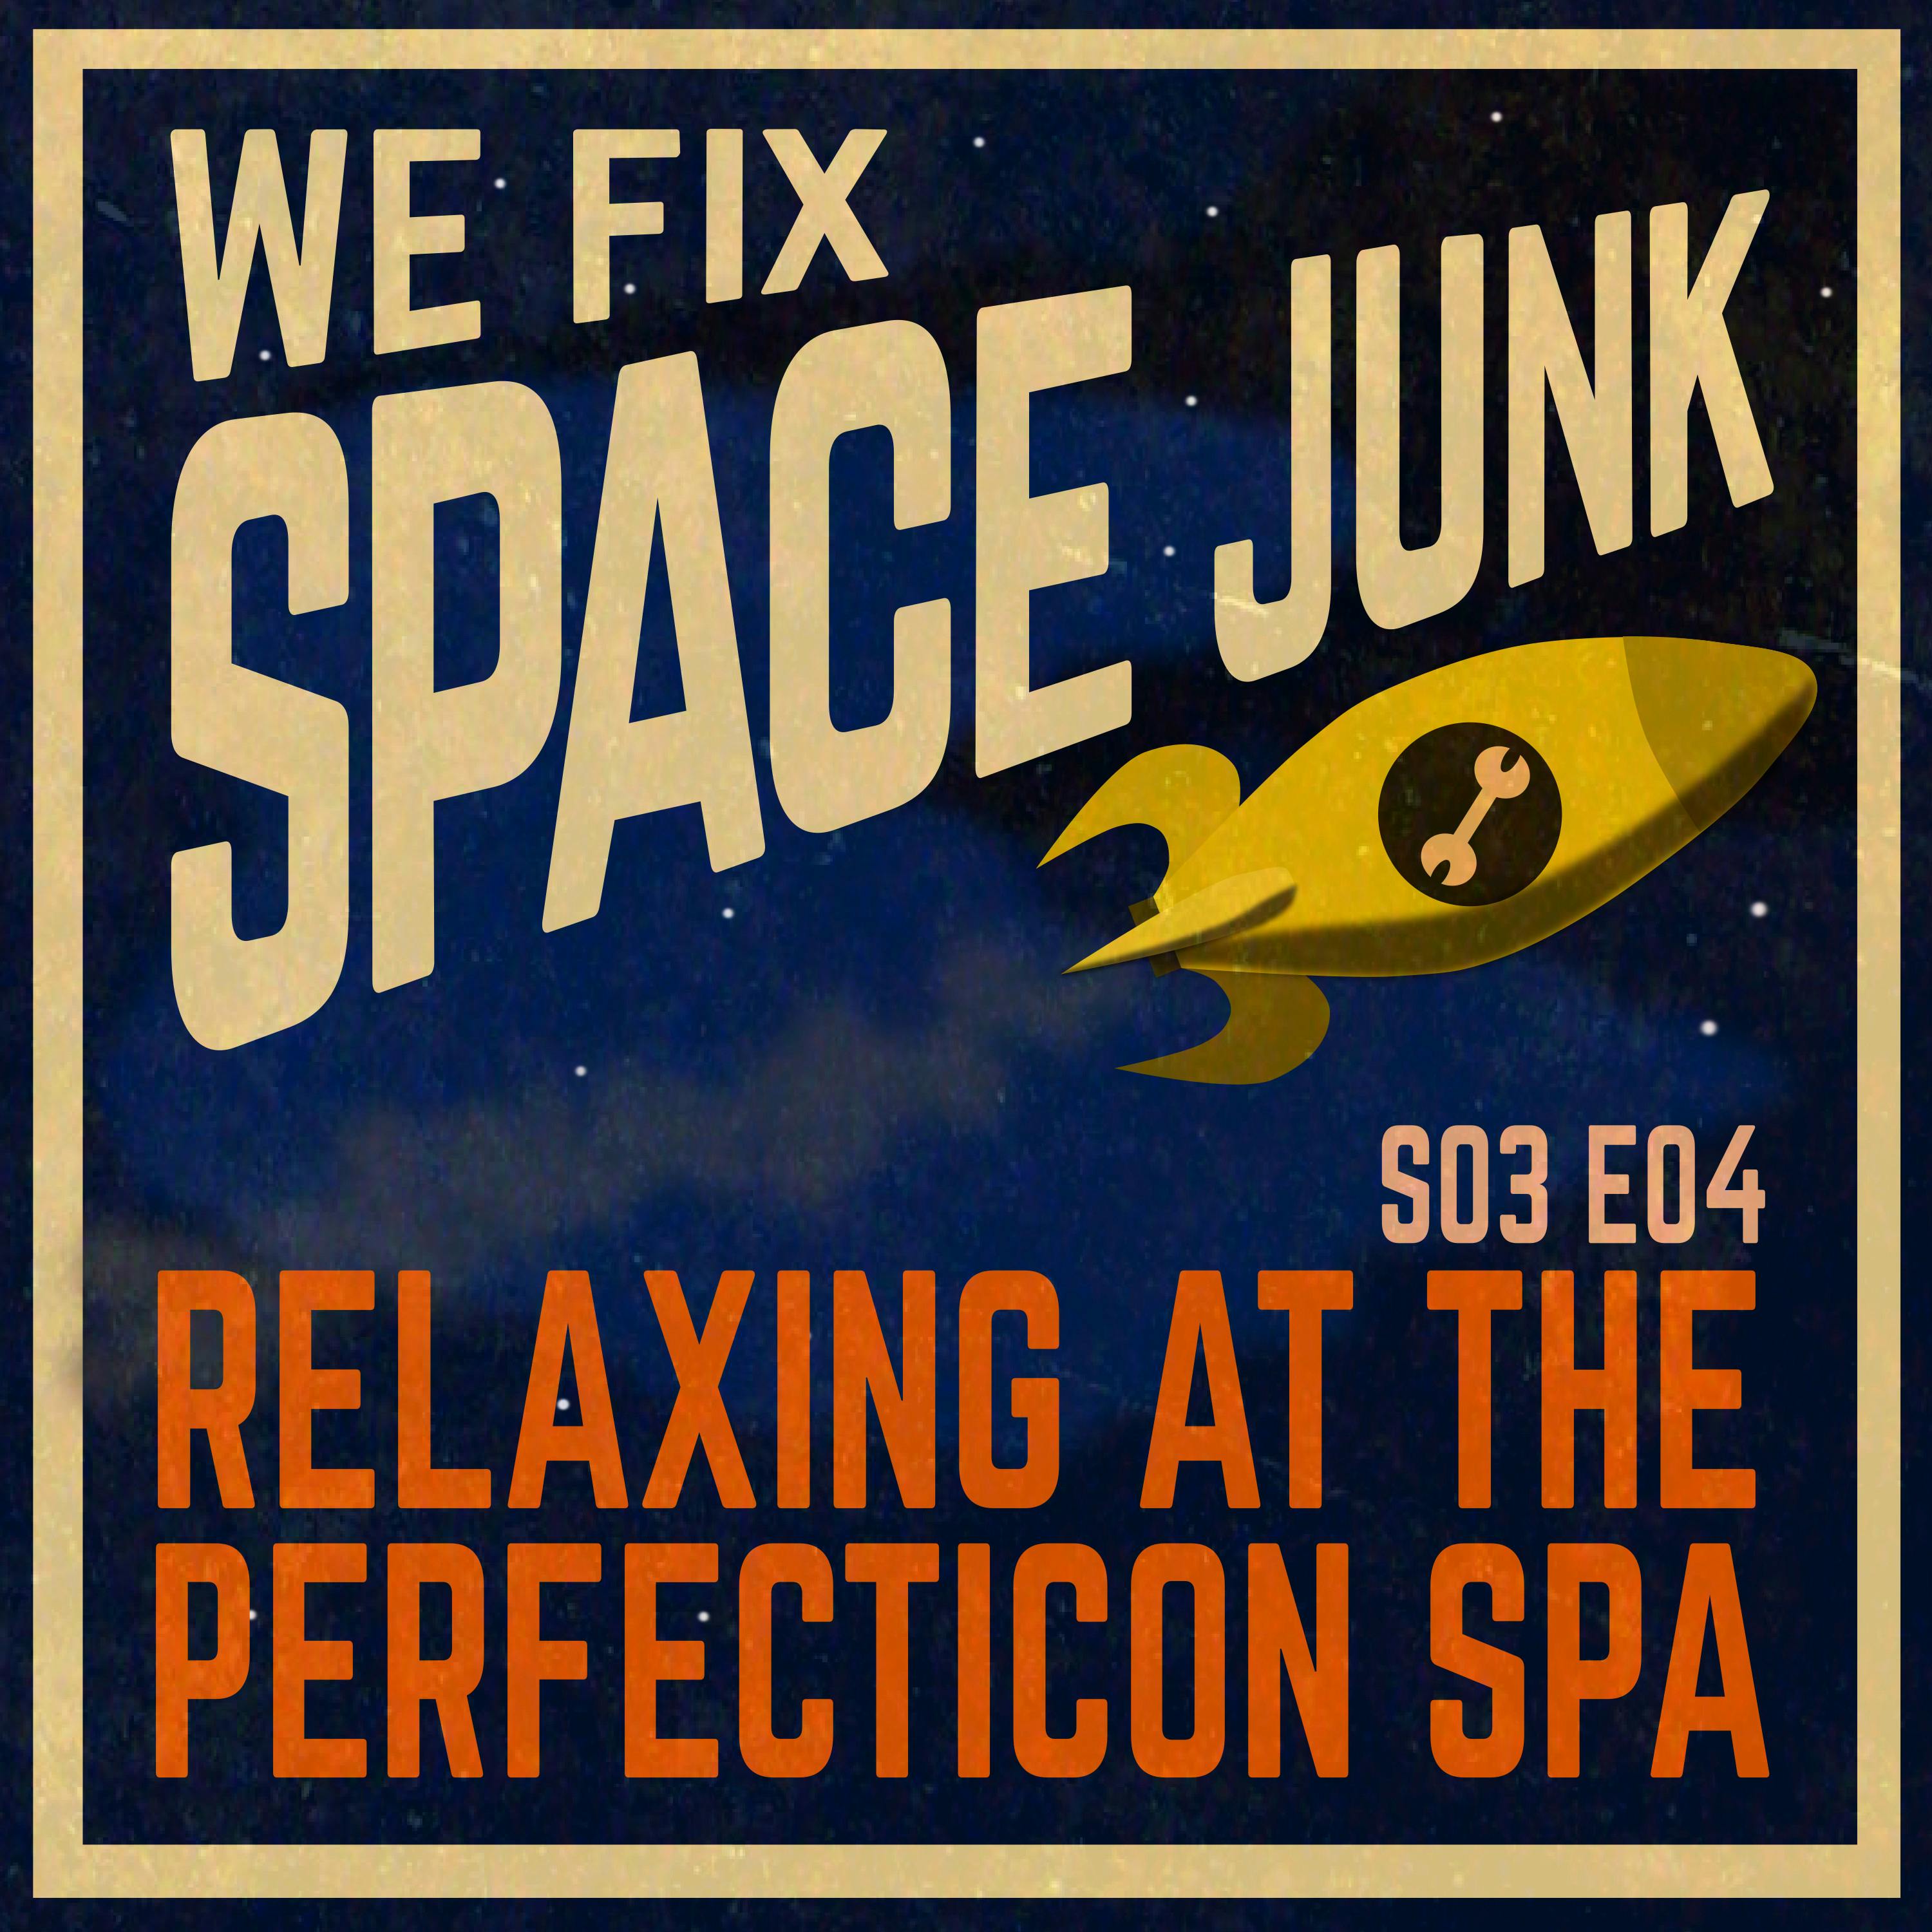 S03E04 - Relaxing at The Perfecticon Spa